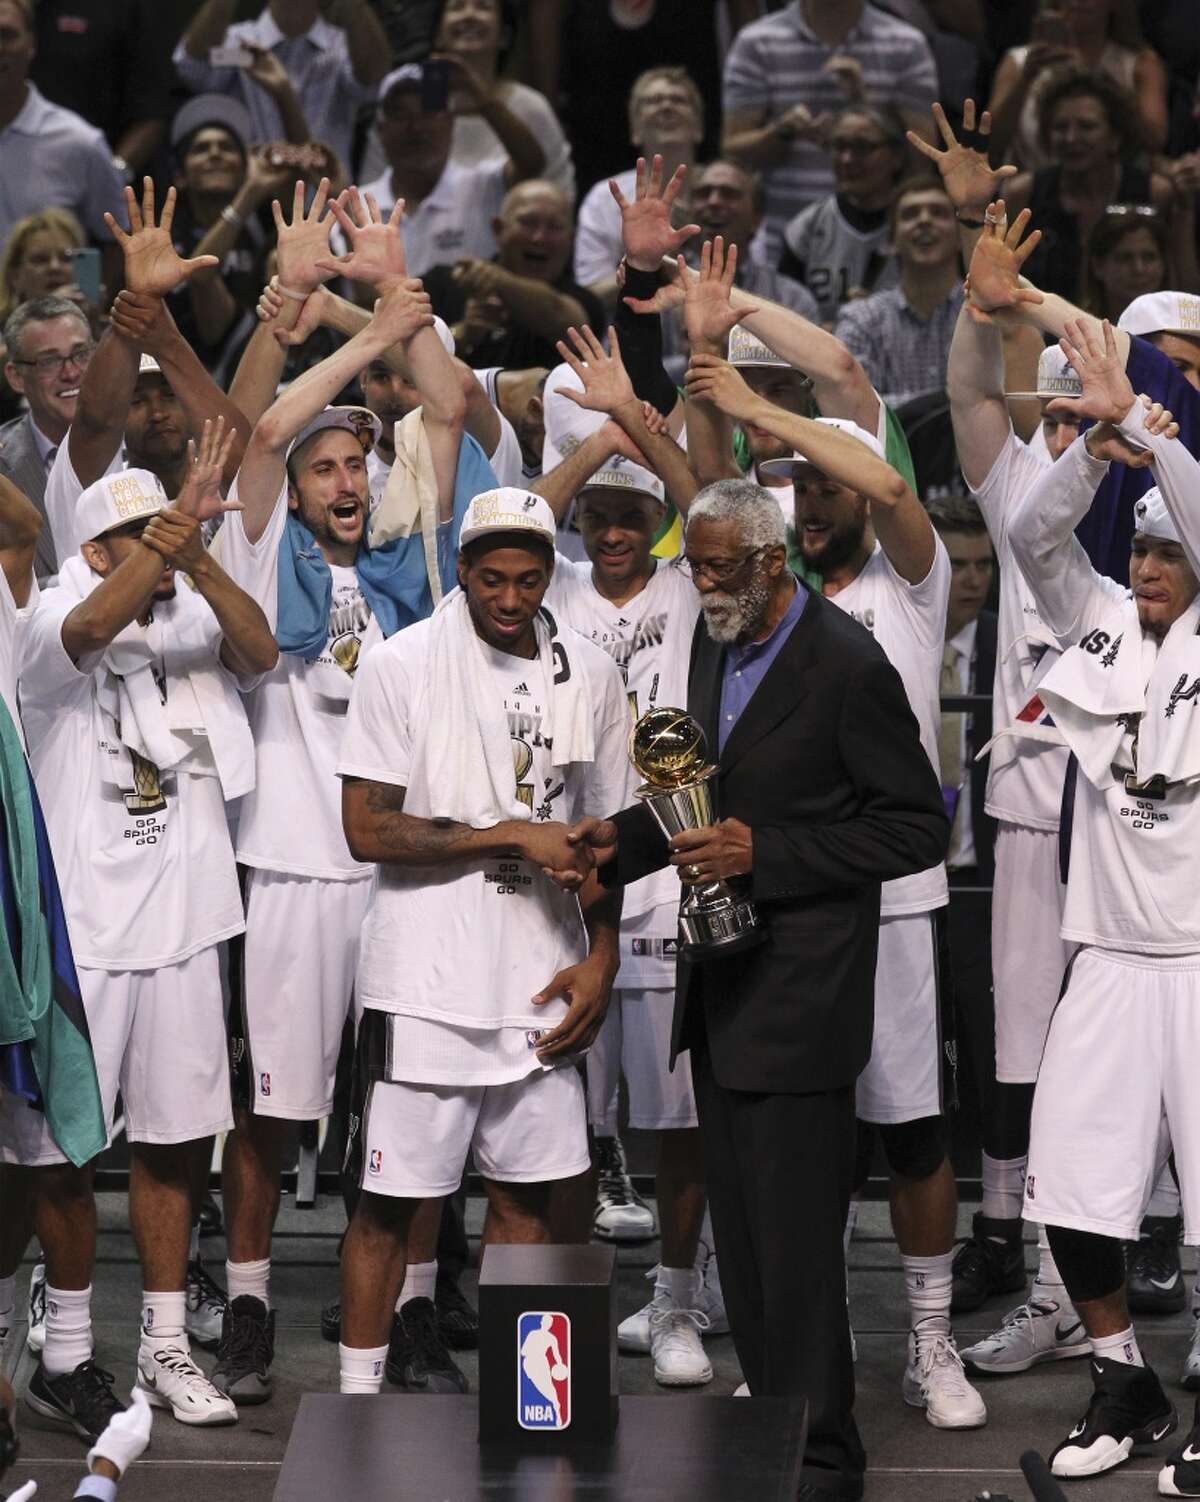 San Antonio Spurs' Kawhi Leonard accepts the Most Valuable Player trophy from NBA legend Bill Russell after the Spurs defeat the Miami Heat in Game 5 of the 2014 NBA Finals at the AT&T Center on Sunday, June 15, 2014. (Kin Man Hui/San Antonio Express-News)